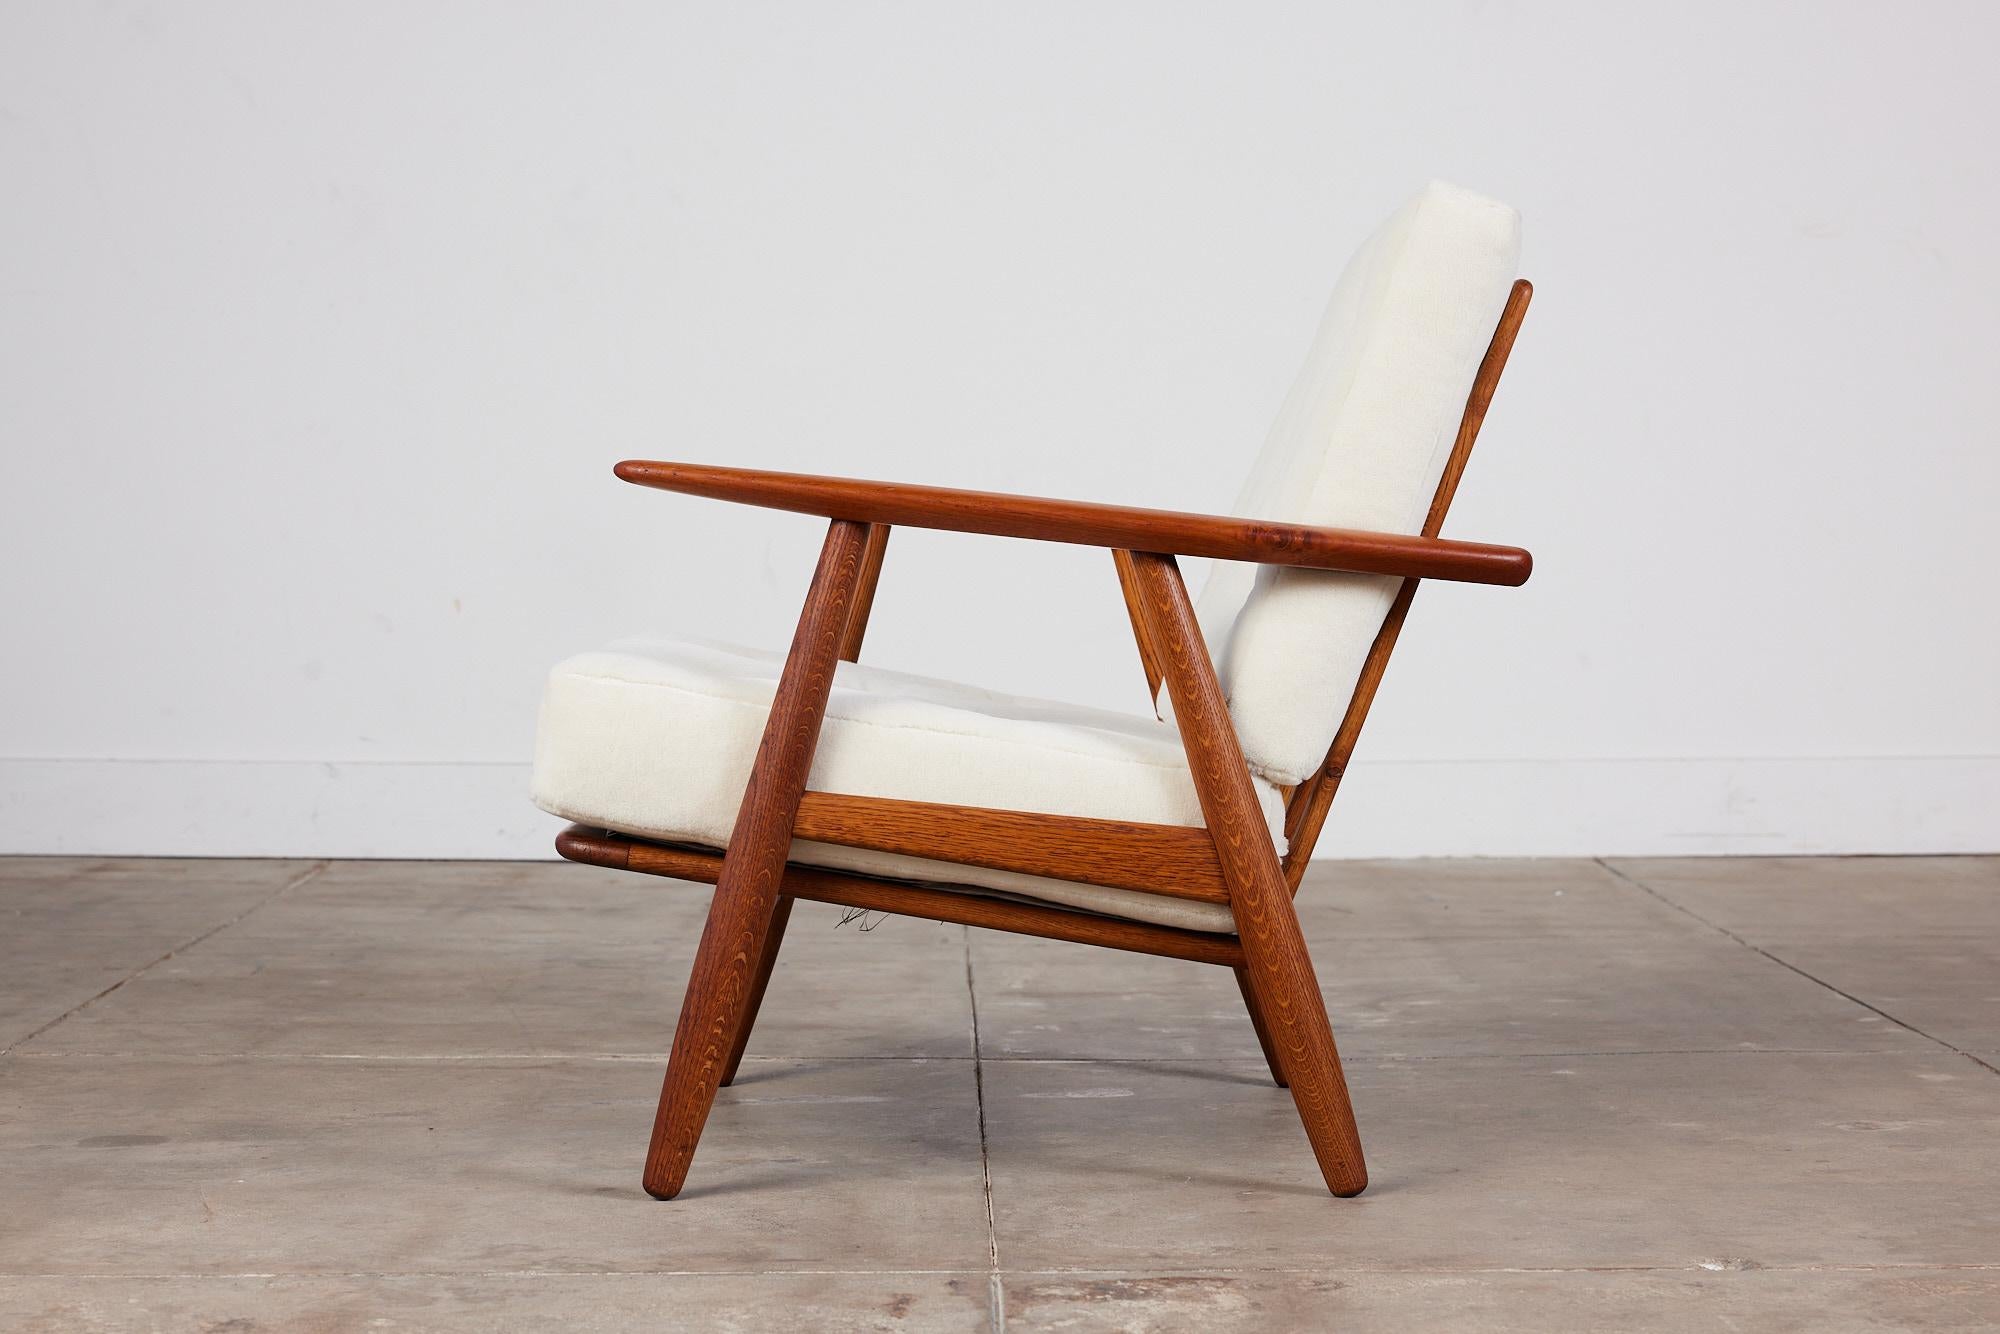 Lounge chair by Hans Wegner for Getama, c.1950s, Denmark. The chair features a solid teak and oak frame with vertical slatted back. The seat and back cushions have been replaced and are covered in a plush cream colored Italian alpaca velvet fabric